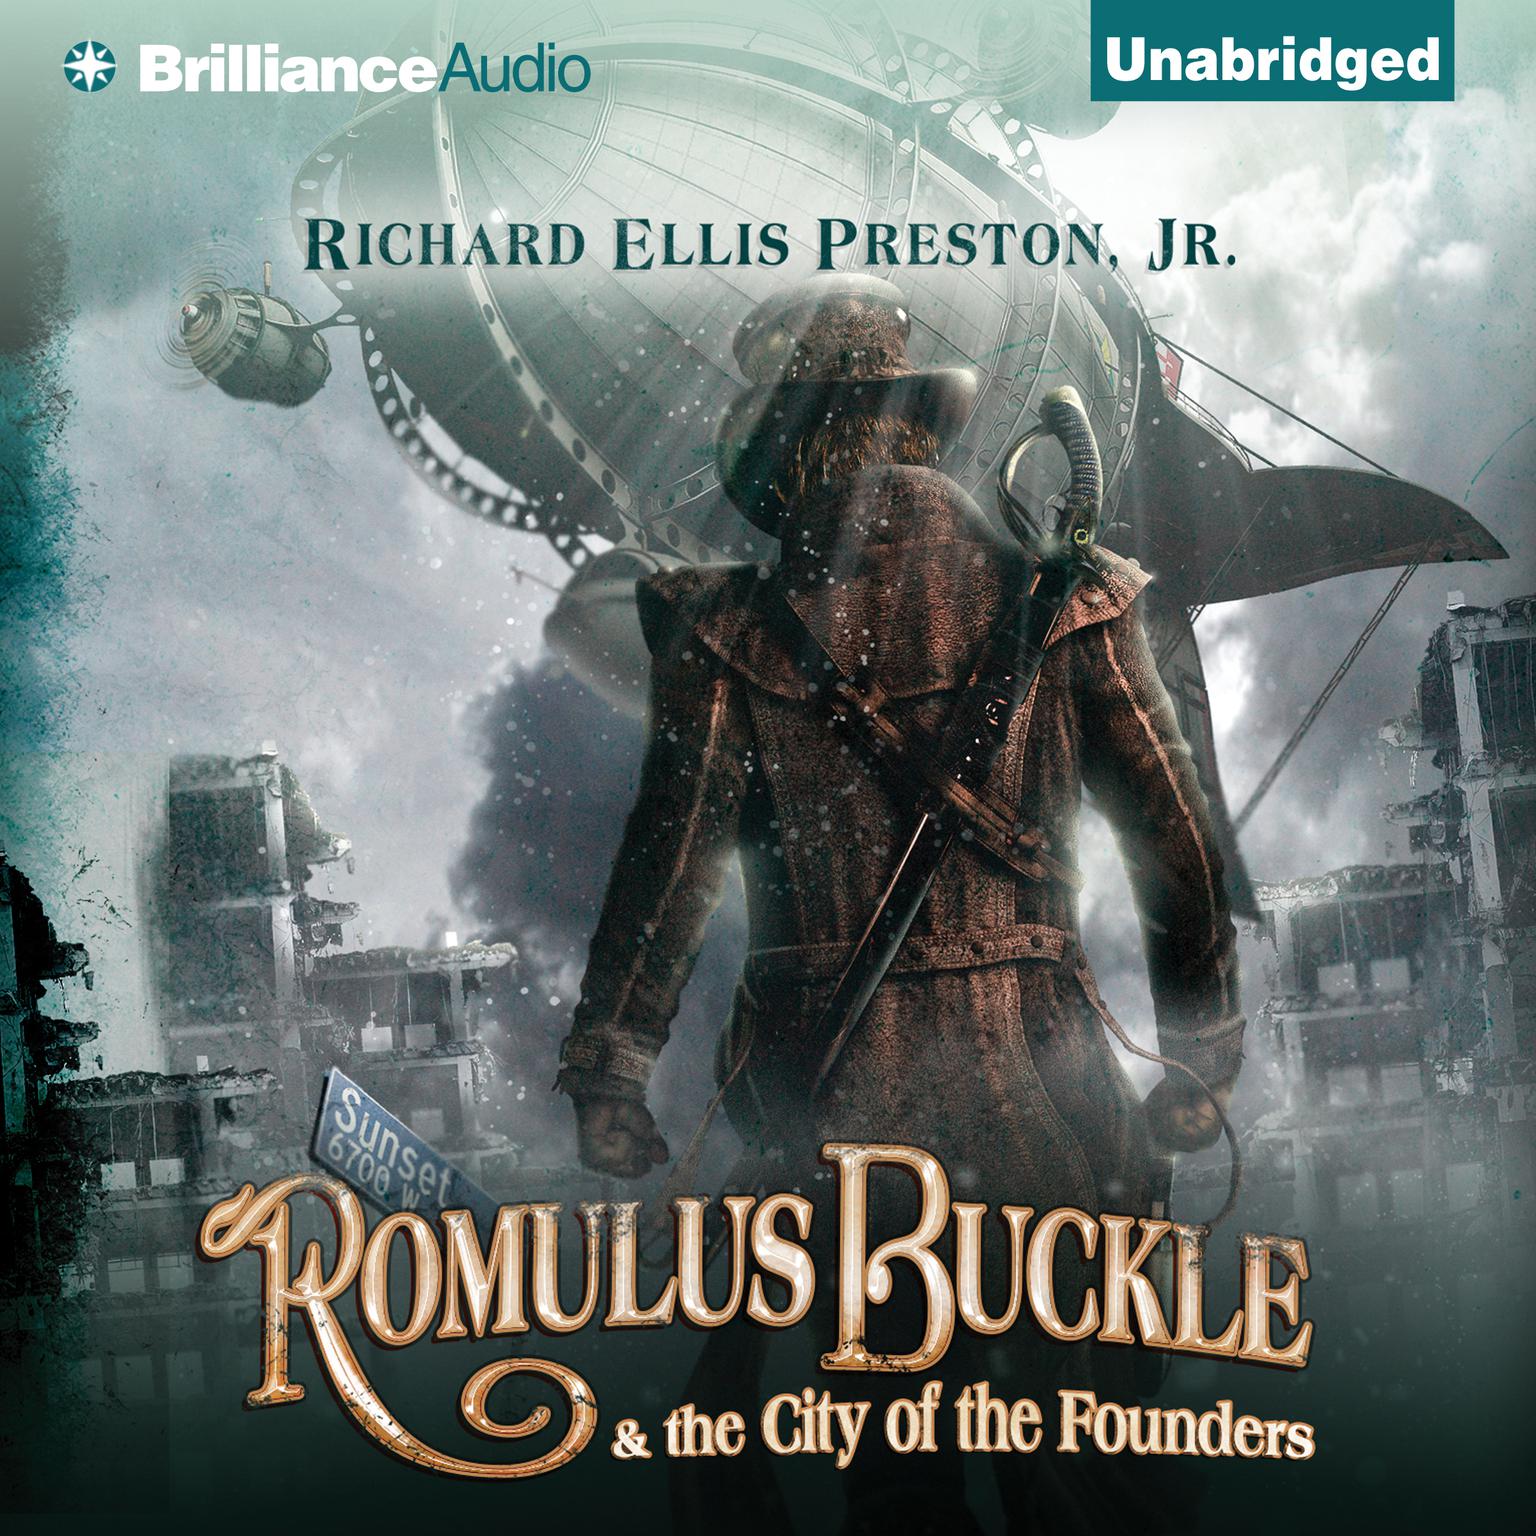 Romulus Buckle & the City of the Founders Audiobook, by Richard Ellis Preston